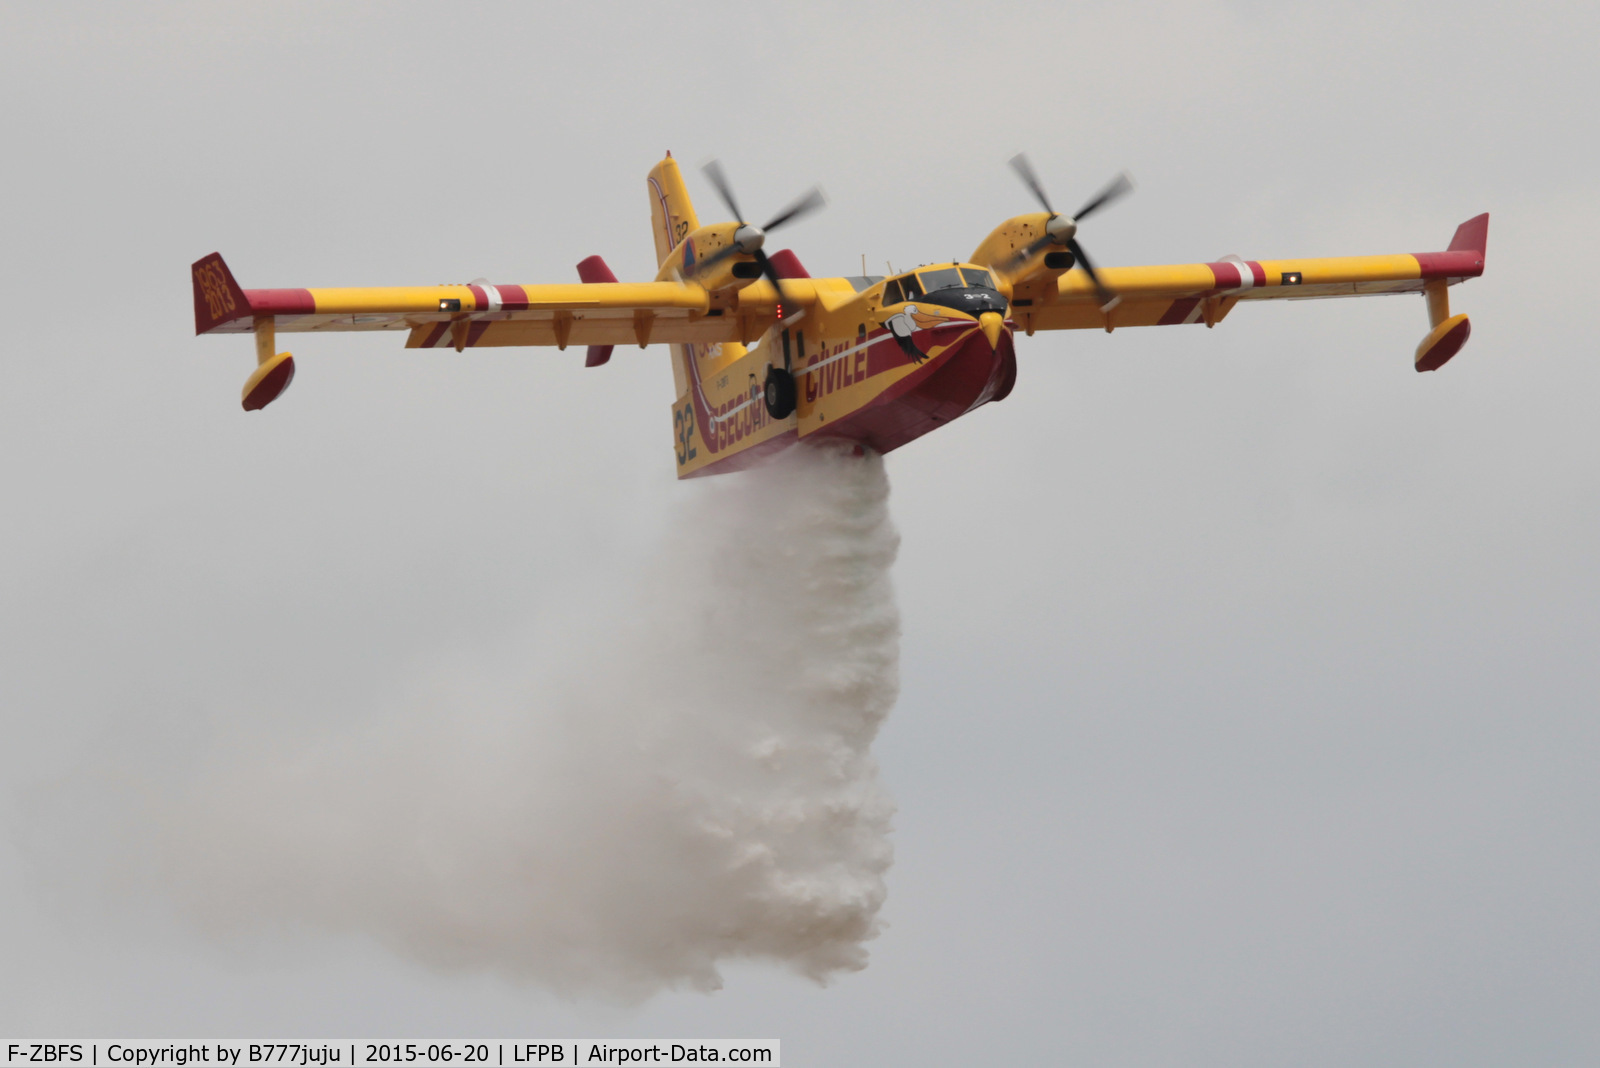 F-ZBFS, Canadair CL-215-6B11 CL-415 C/N 2001, at Le Bourget for SIAE 2015